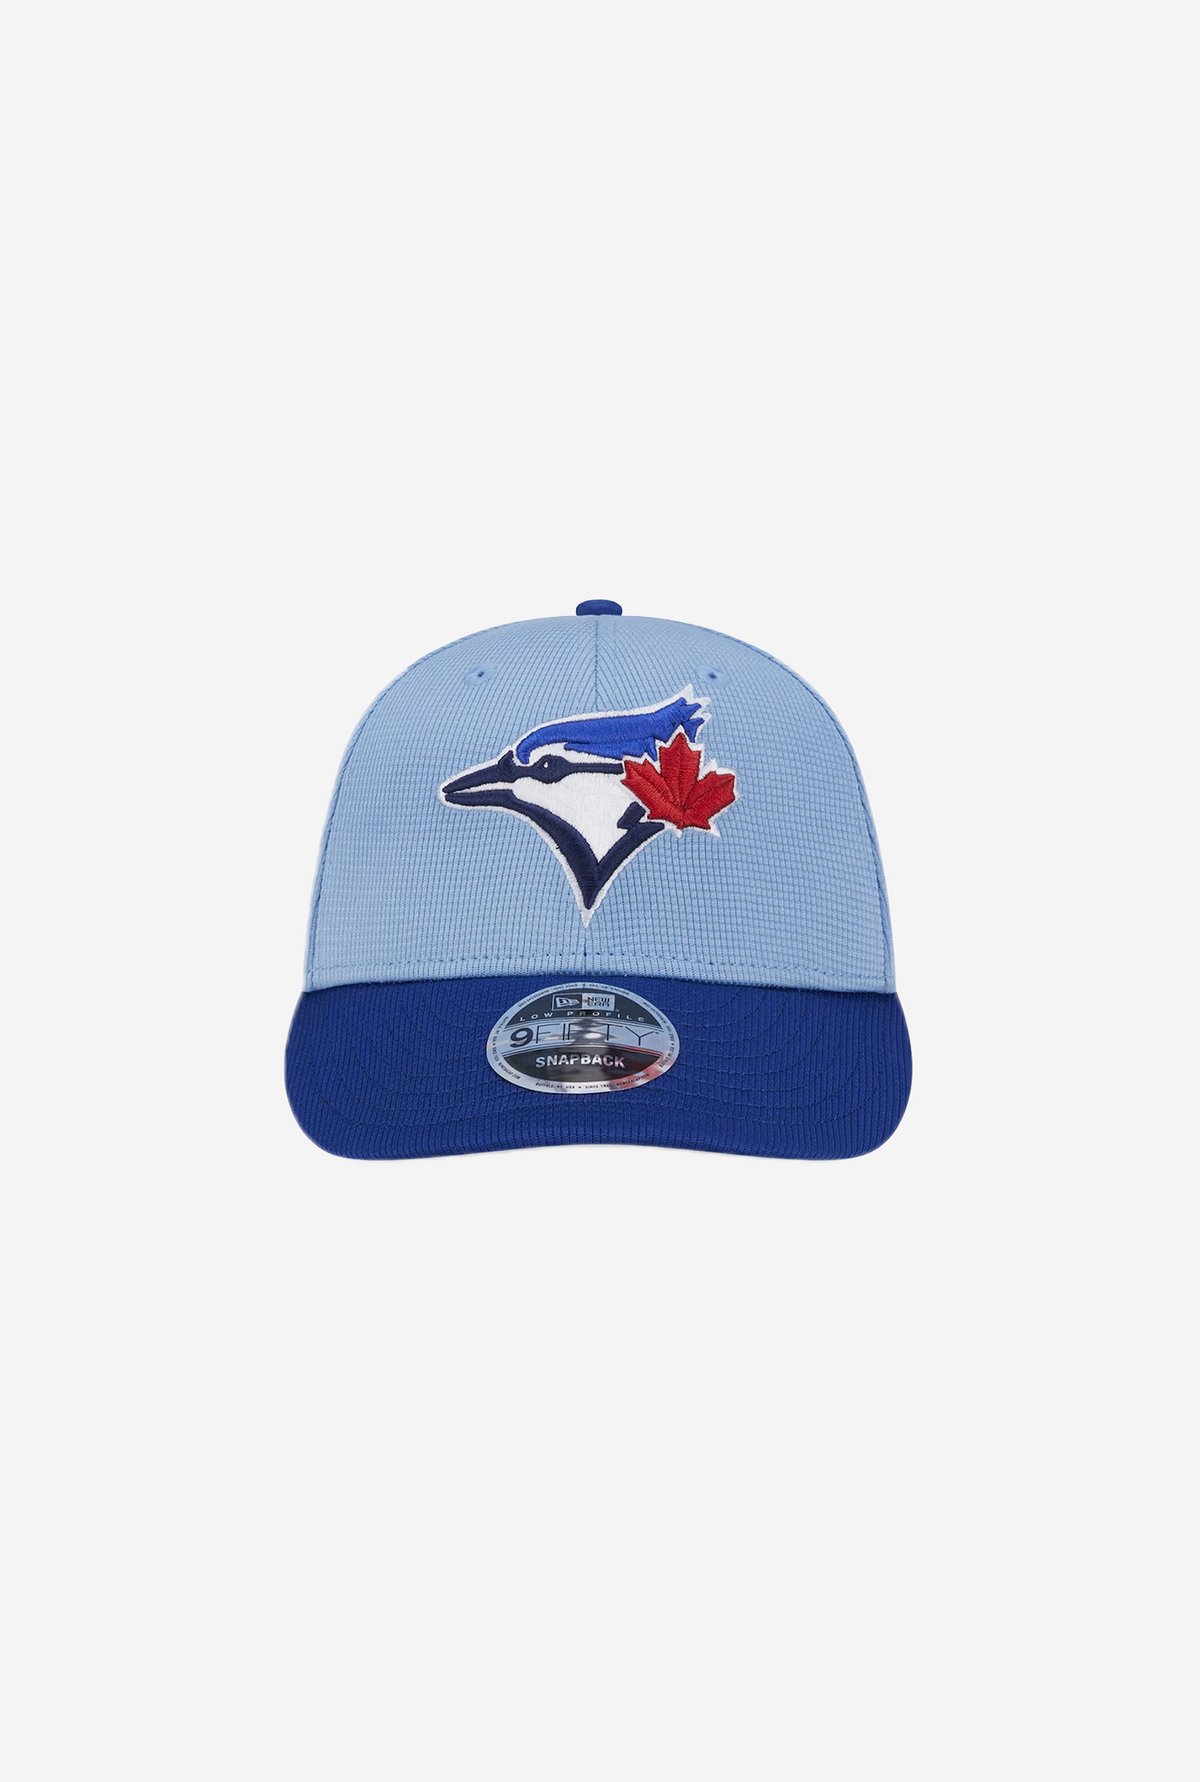 Toronto Blue Jays Spring Training 9FIFTY Low Profile Hat